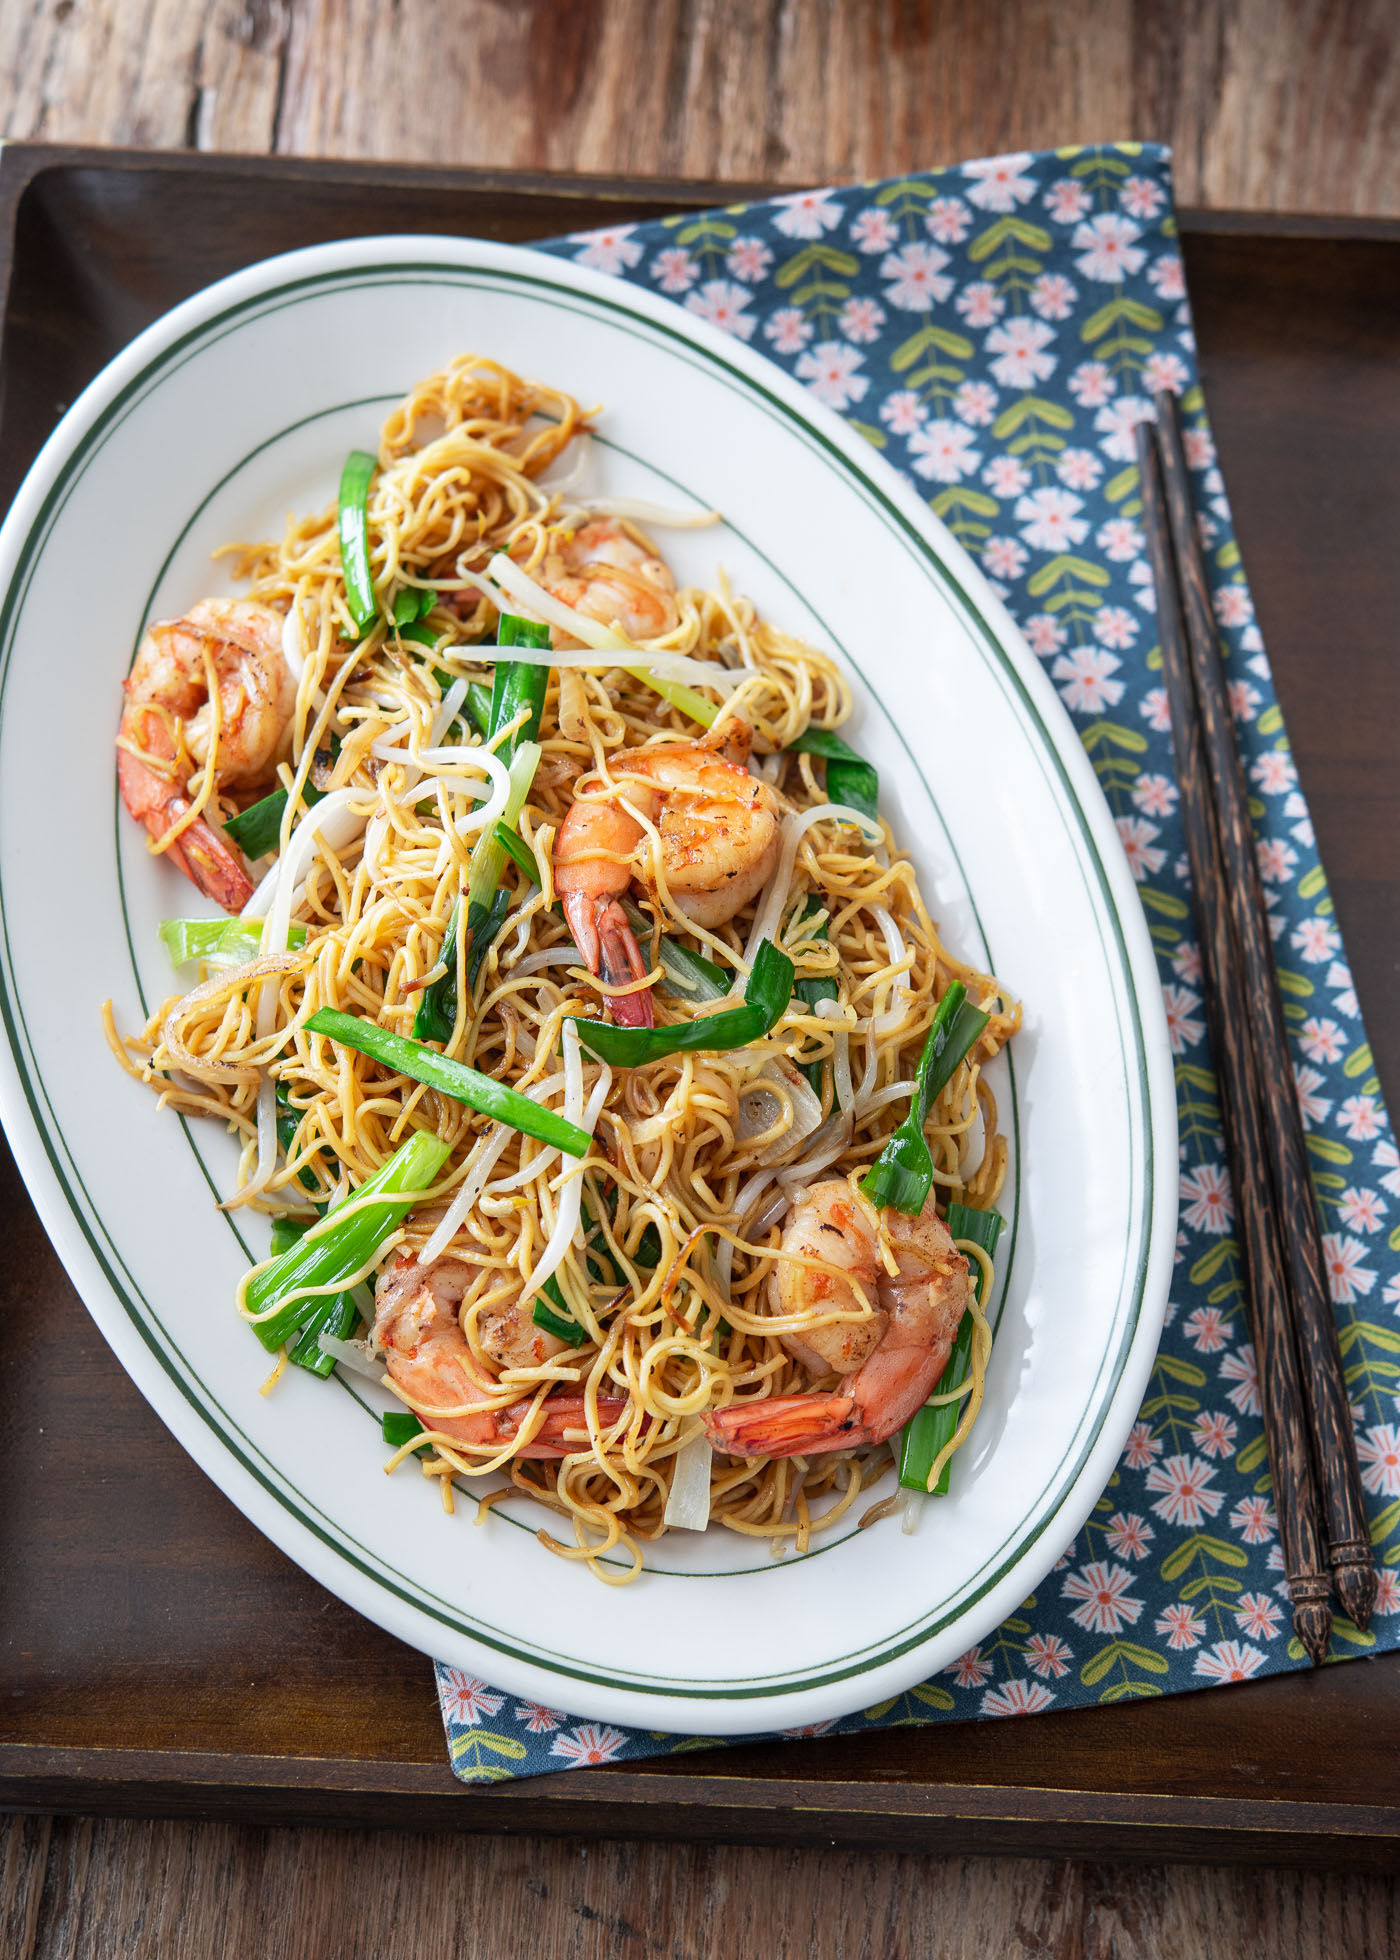 Hong Kong noodles with shrimp and vegetables on a plate.